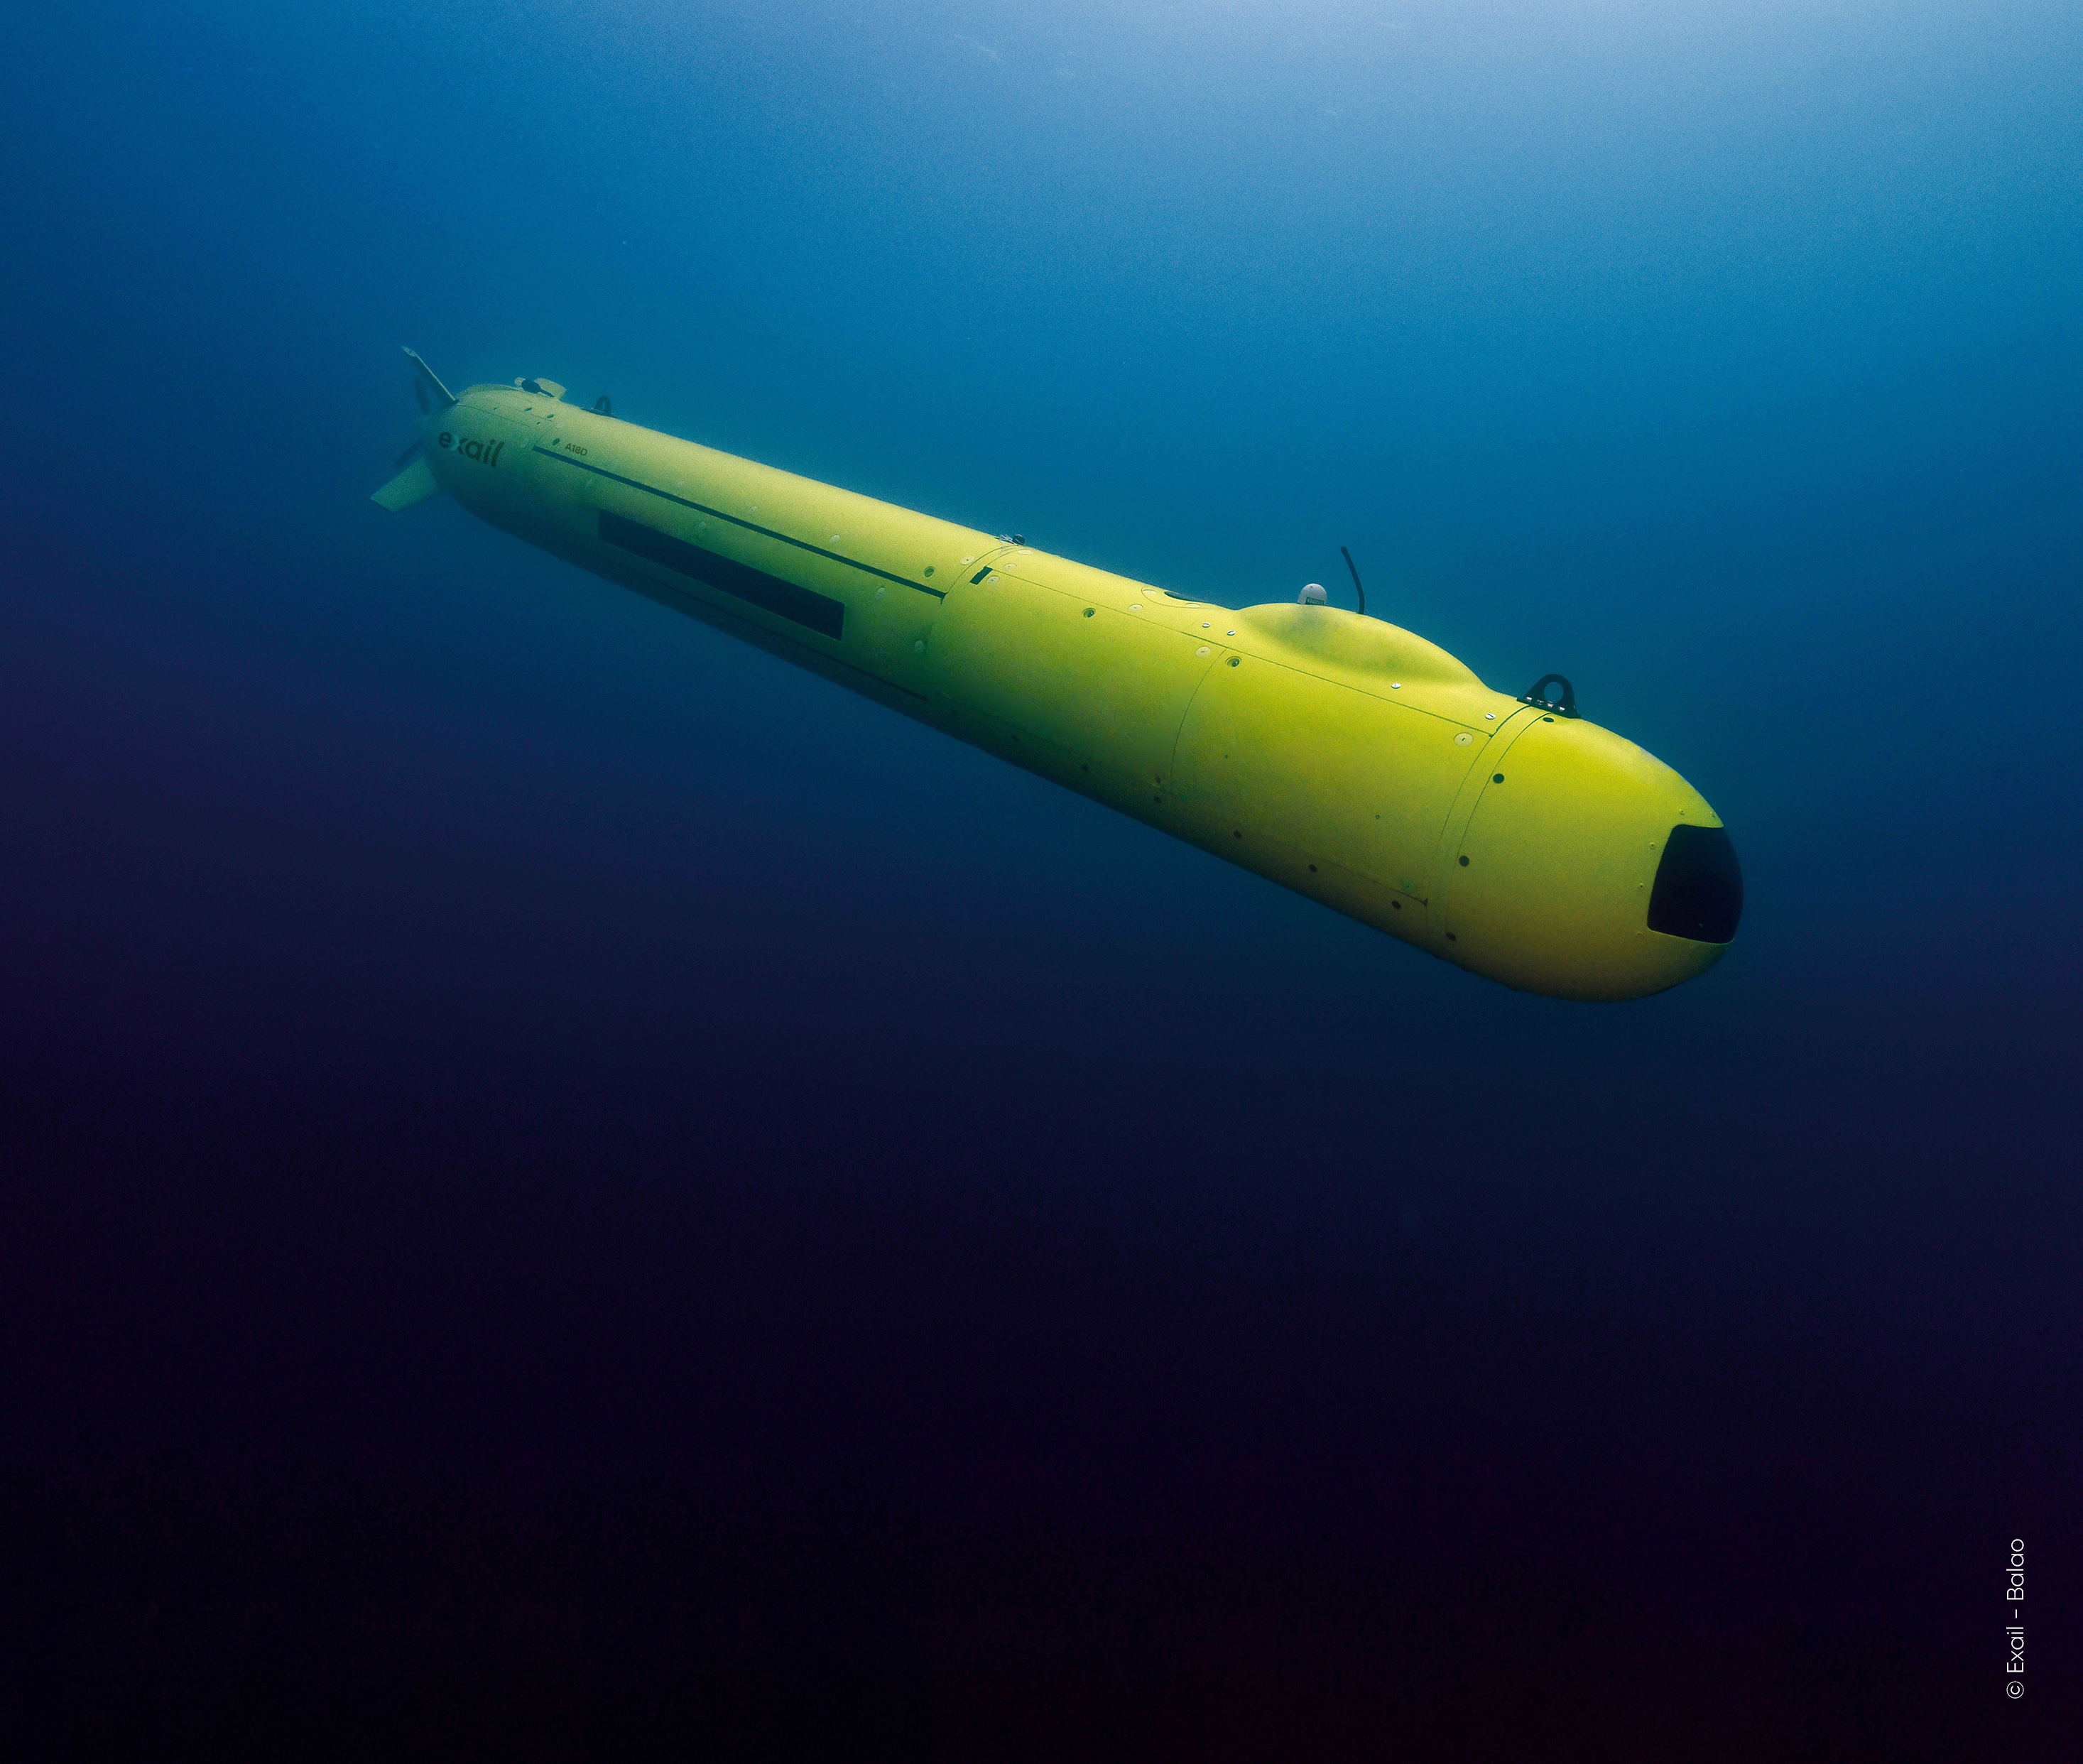 French project to develop seabed surveying solution for great depths using AUV swarms